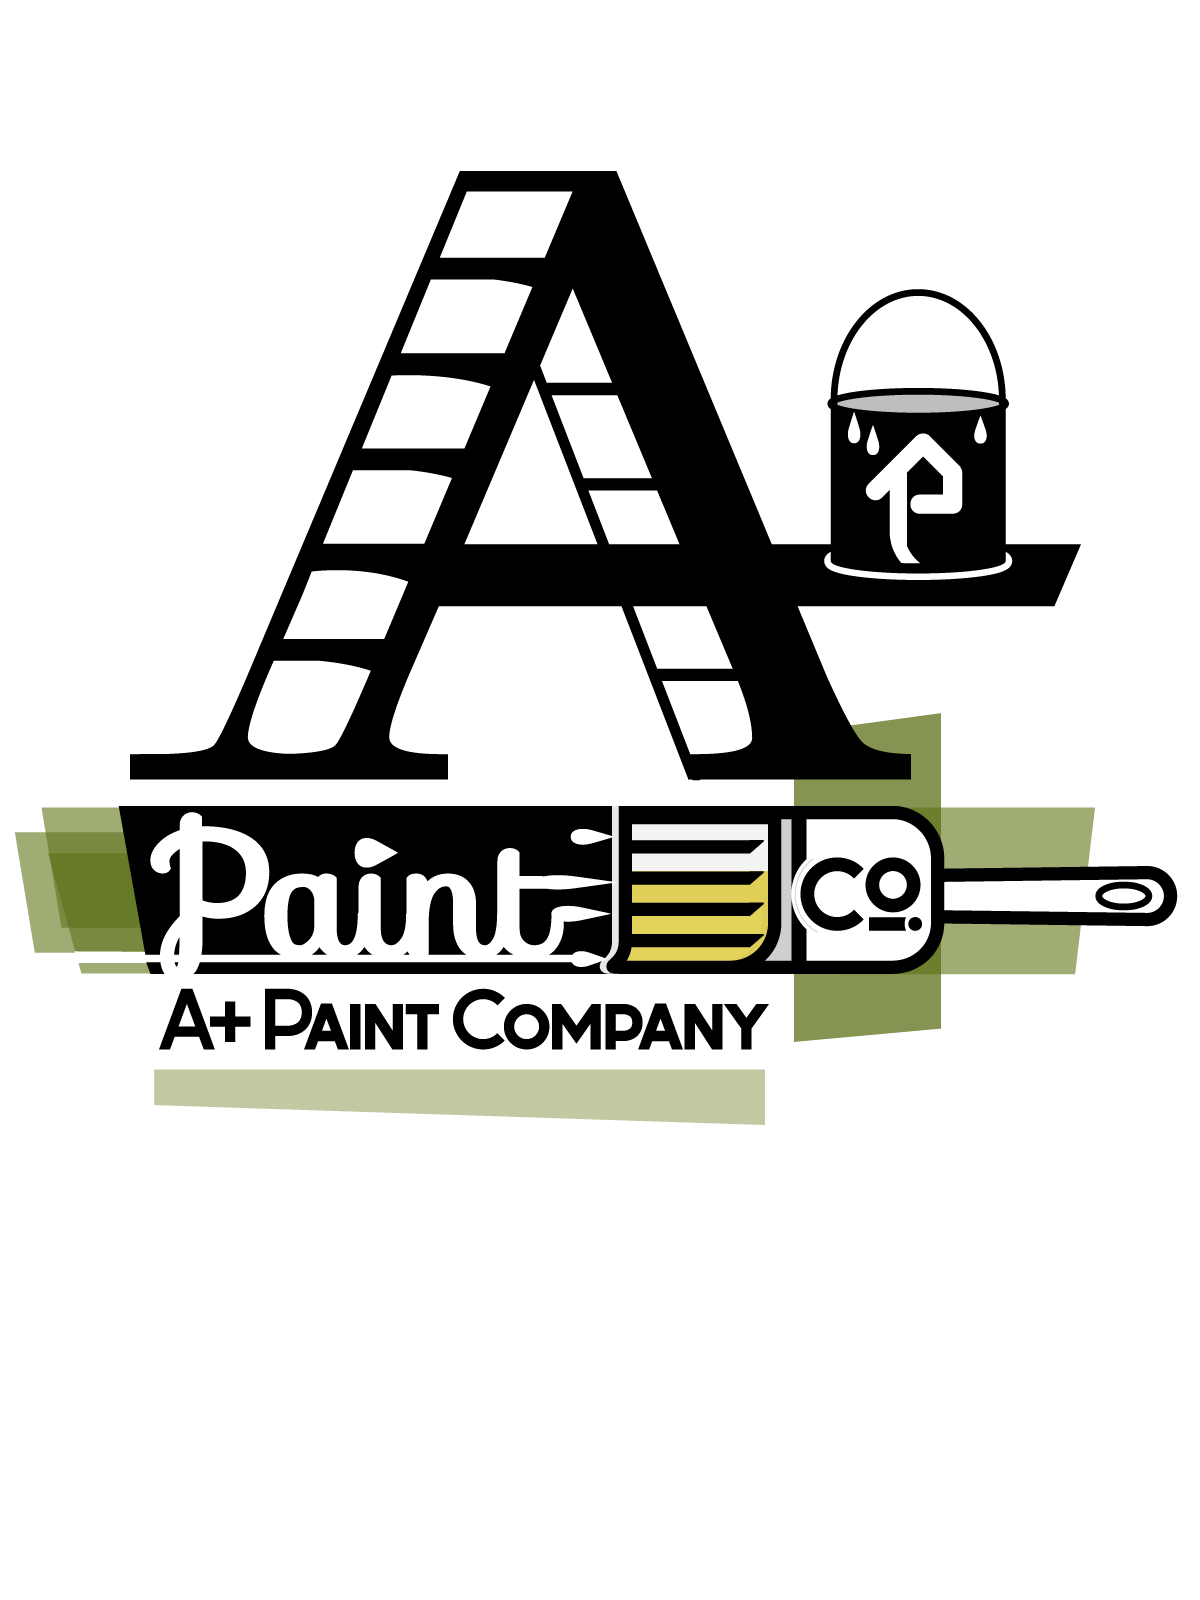 Painting Company Logo - A+ Paint Company Identity by Adam Garlinger Illustration + Design